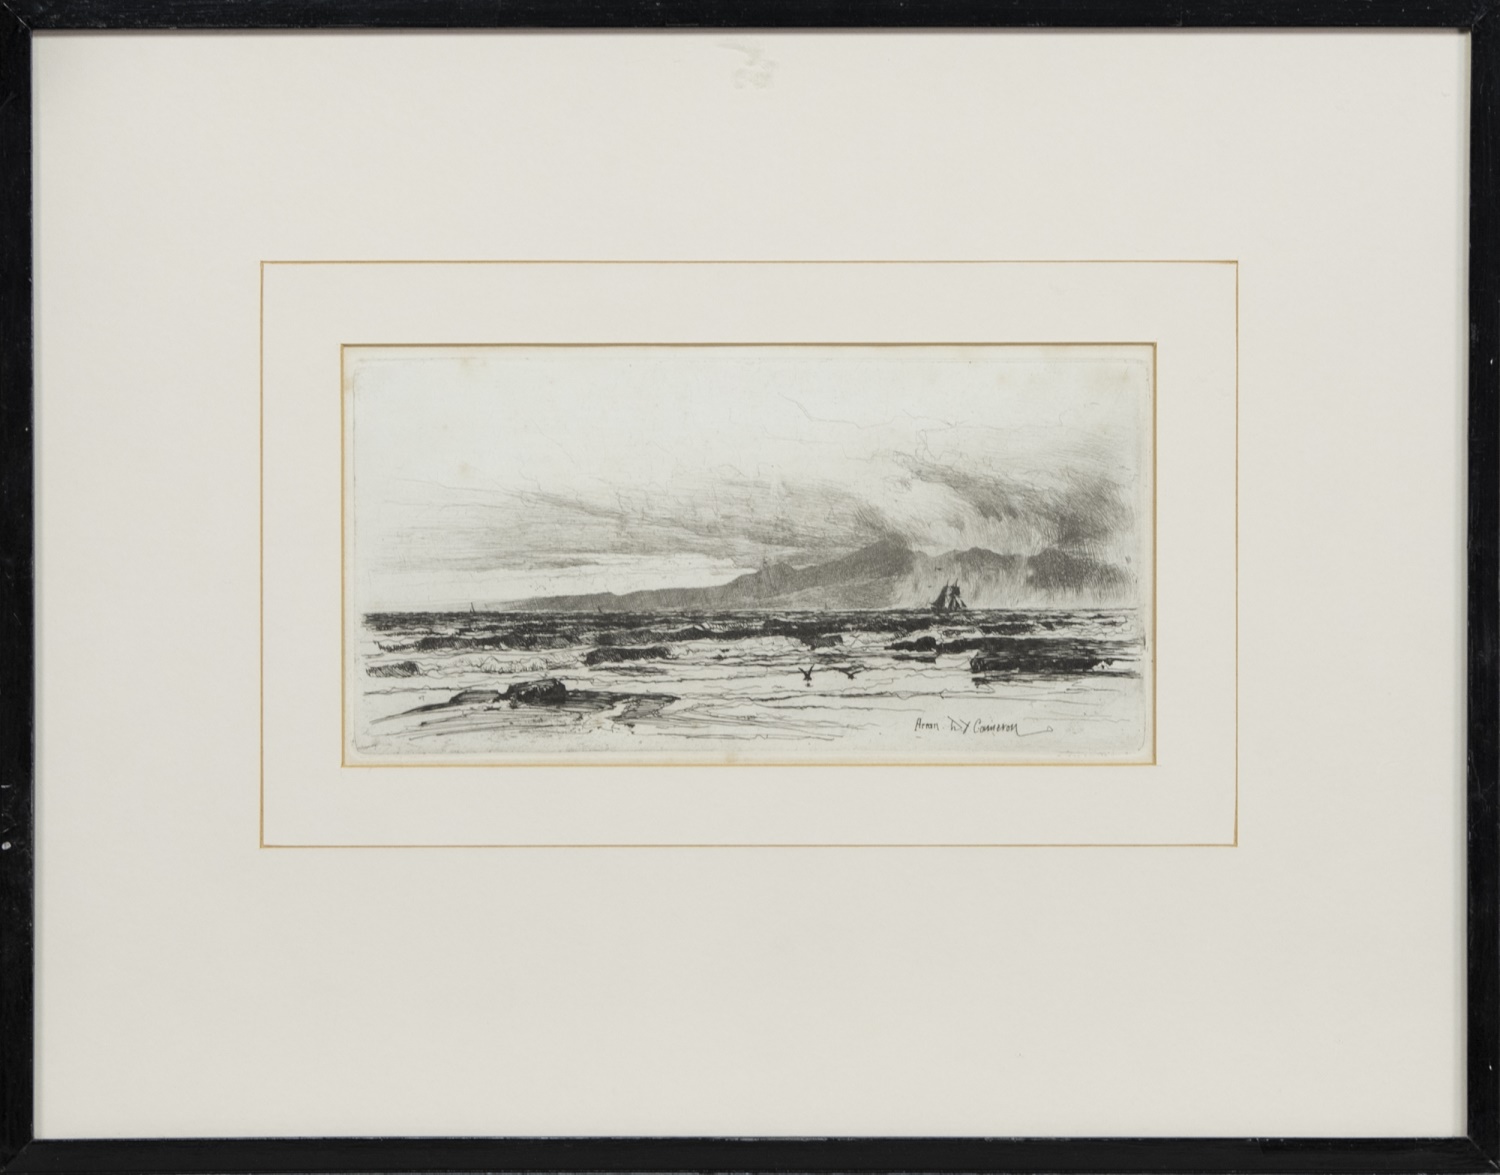 ARRAN, AN ETCHING BY D Y CAMERON